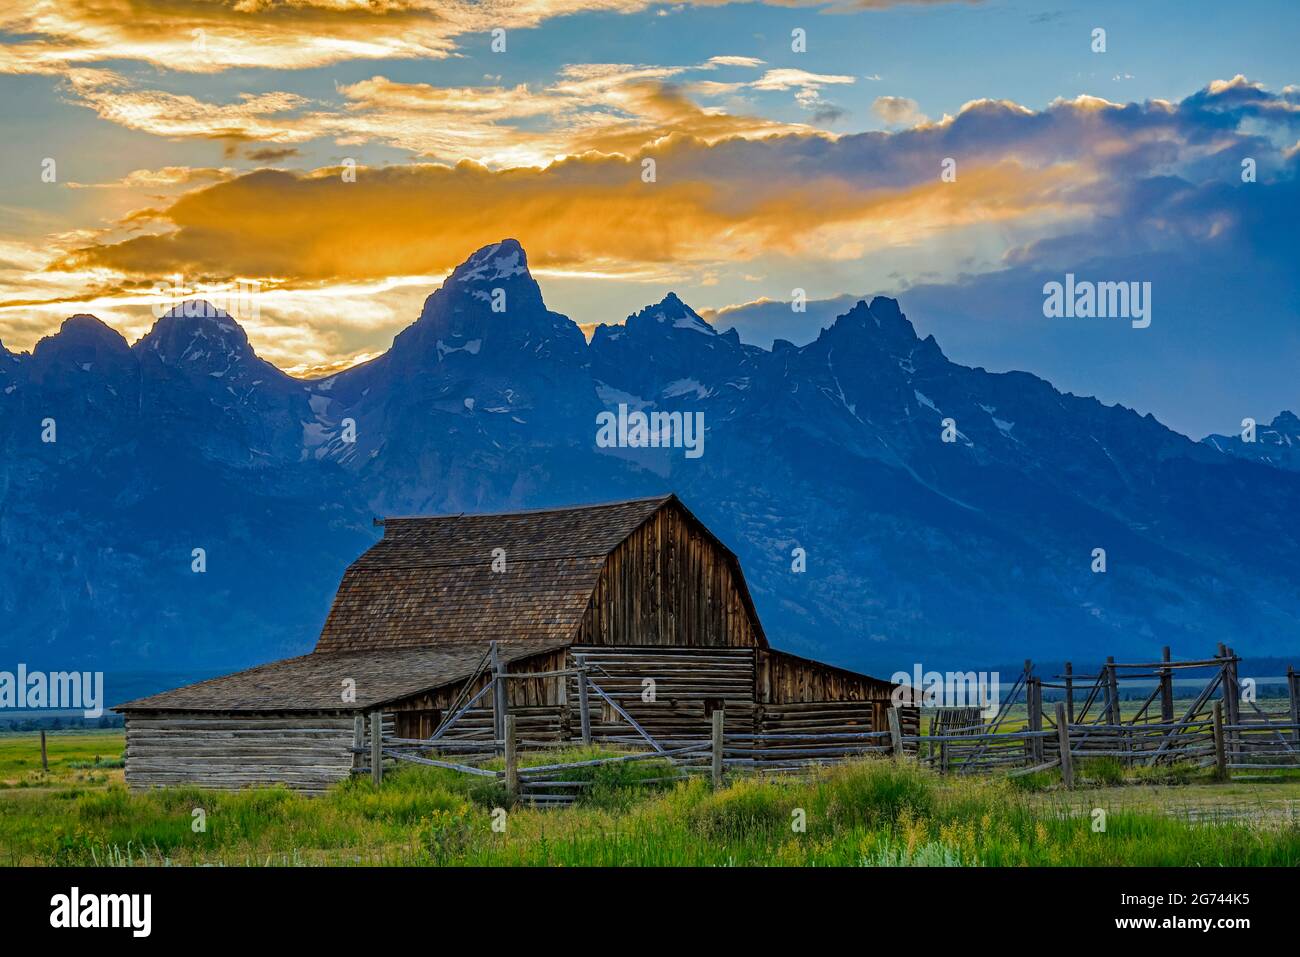 A view of the John and Bartha Moulton barn with the spectacular backdrop of the sunset over the Teton Range in Grand Teton National Park, WY, USA. Stock Photo